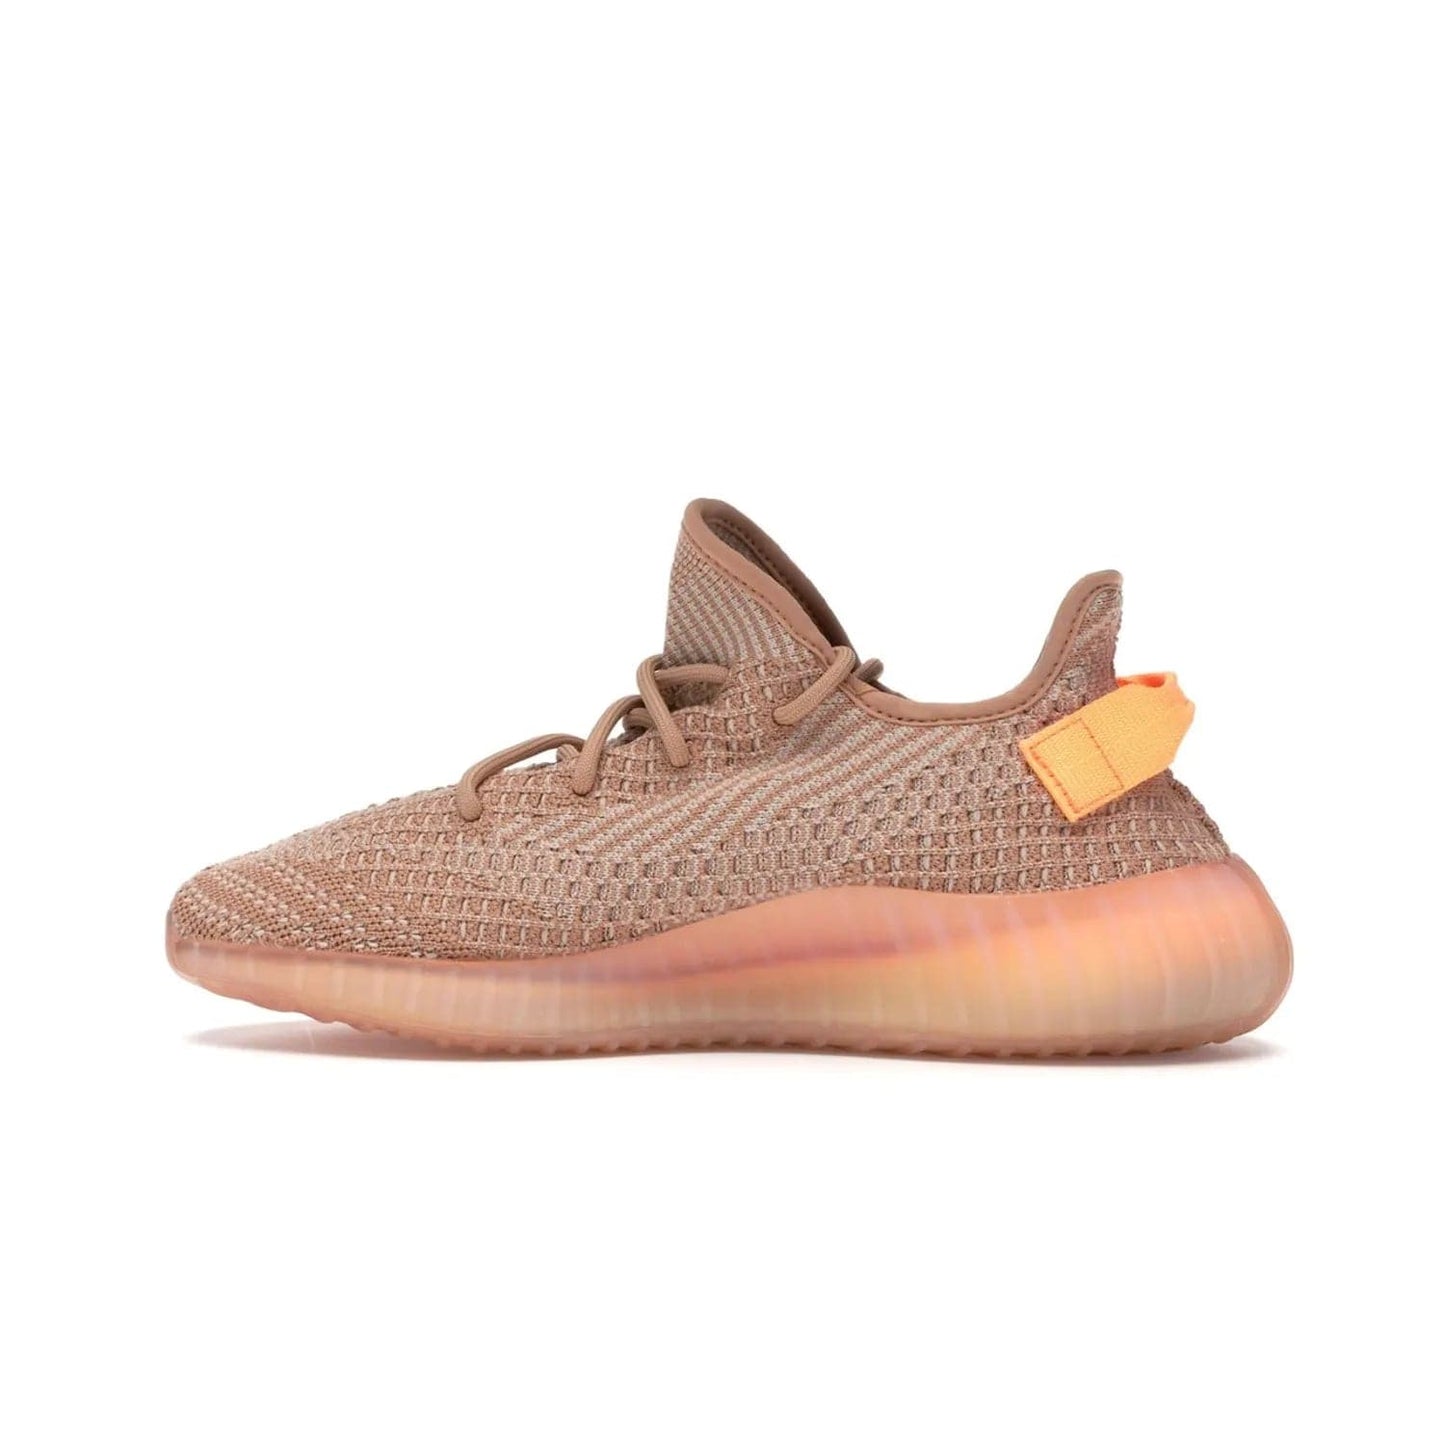 adidas Yeezy Boost 350 V2 Clay - Image 20 - Only at www.BallersClubKickz.com - The adidas Yeezy Boost 350 V2 Clay - style and swag in one shoe. Orange accents, clay midsole and sole. Get yours today!